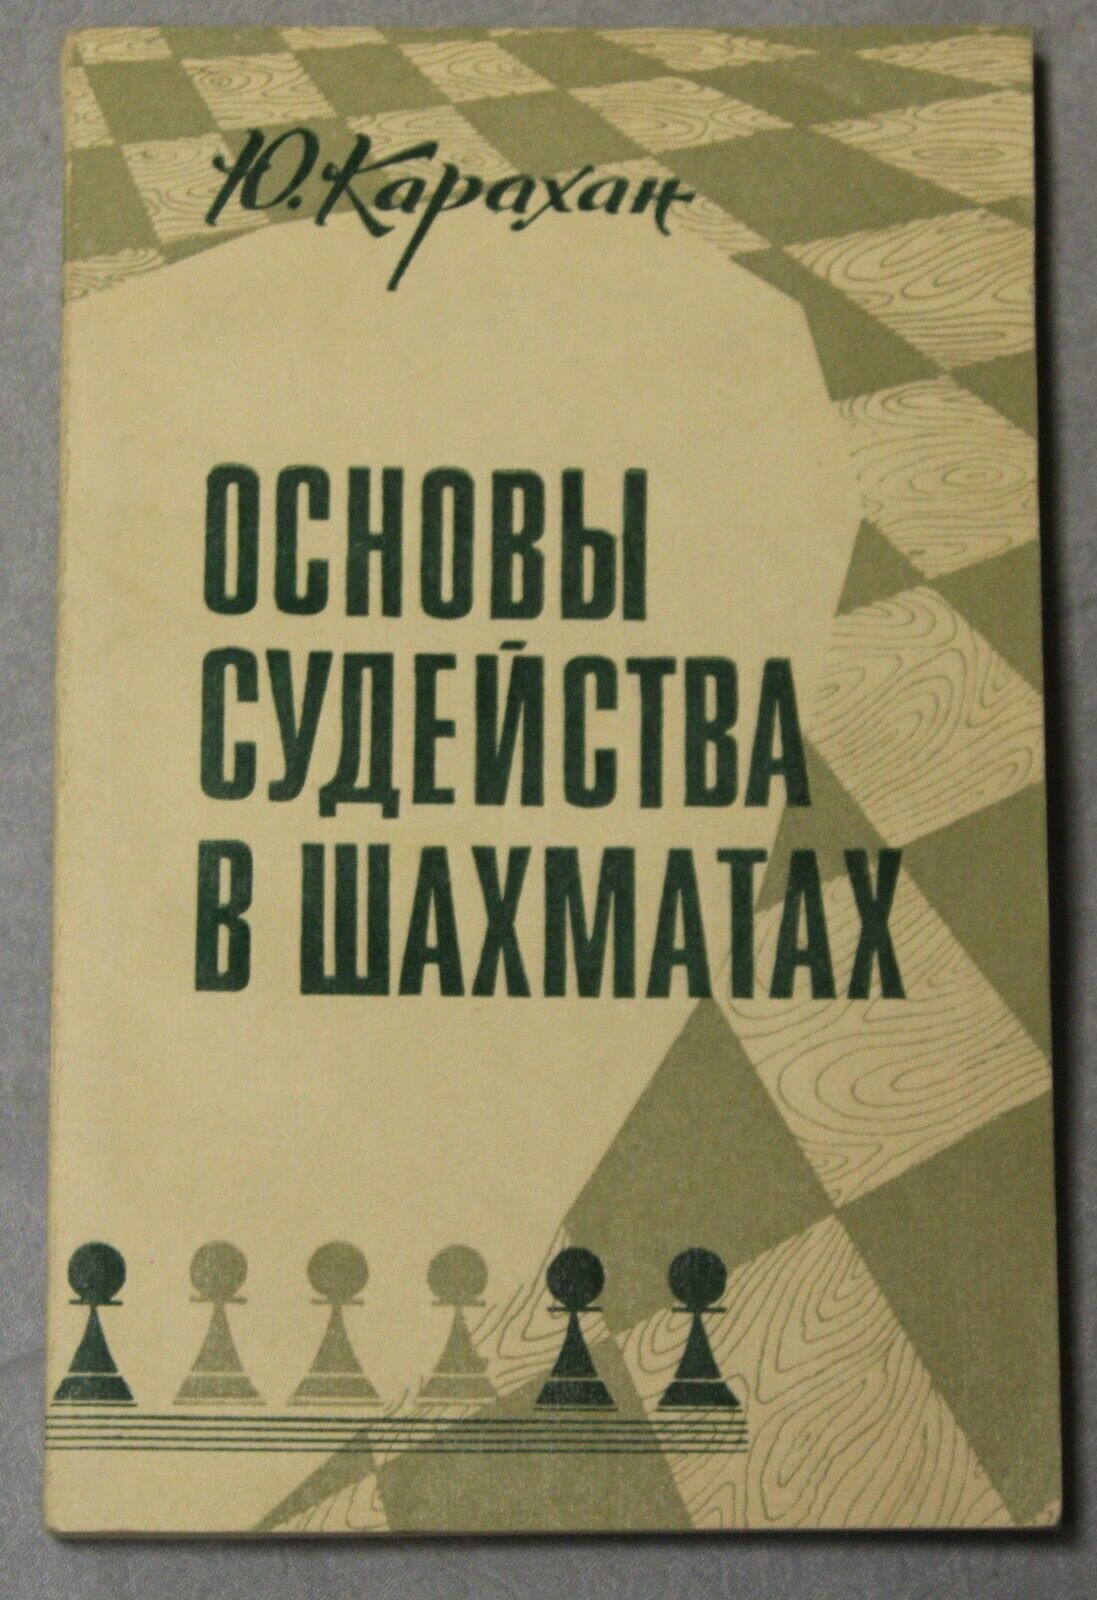 11463.Russian Chess Book signed by  Karahan, Y. I. Basics of judging in chess. 1974